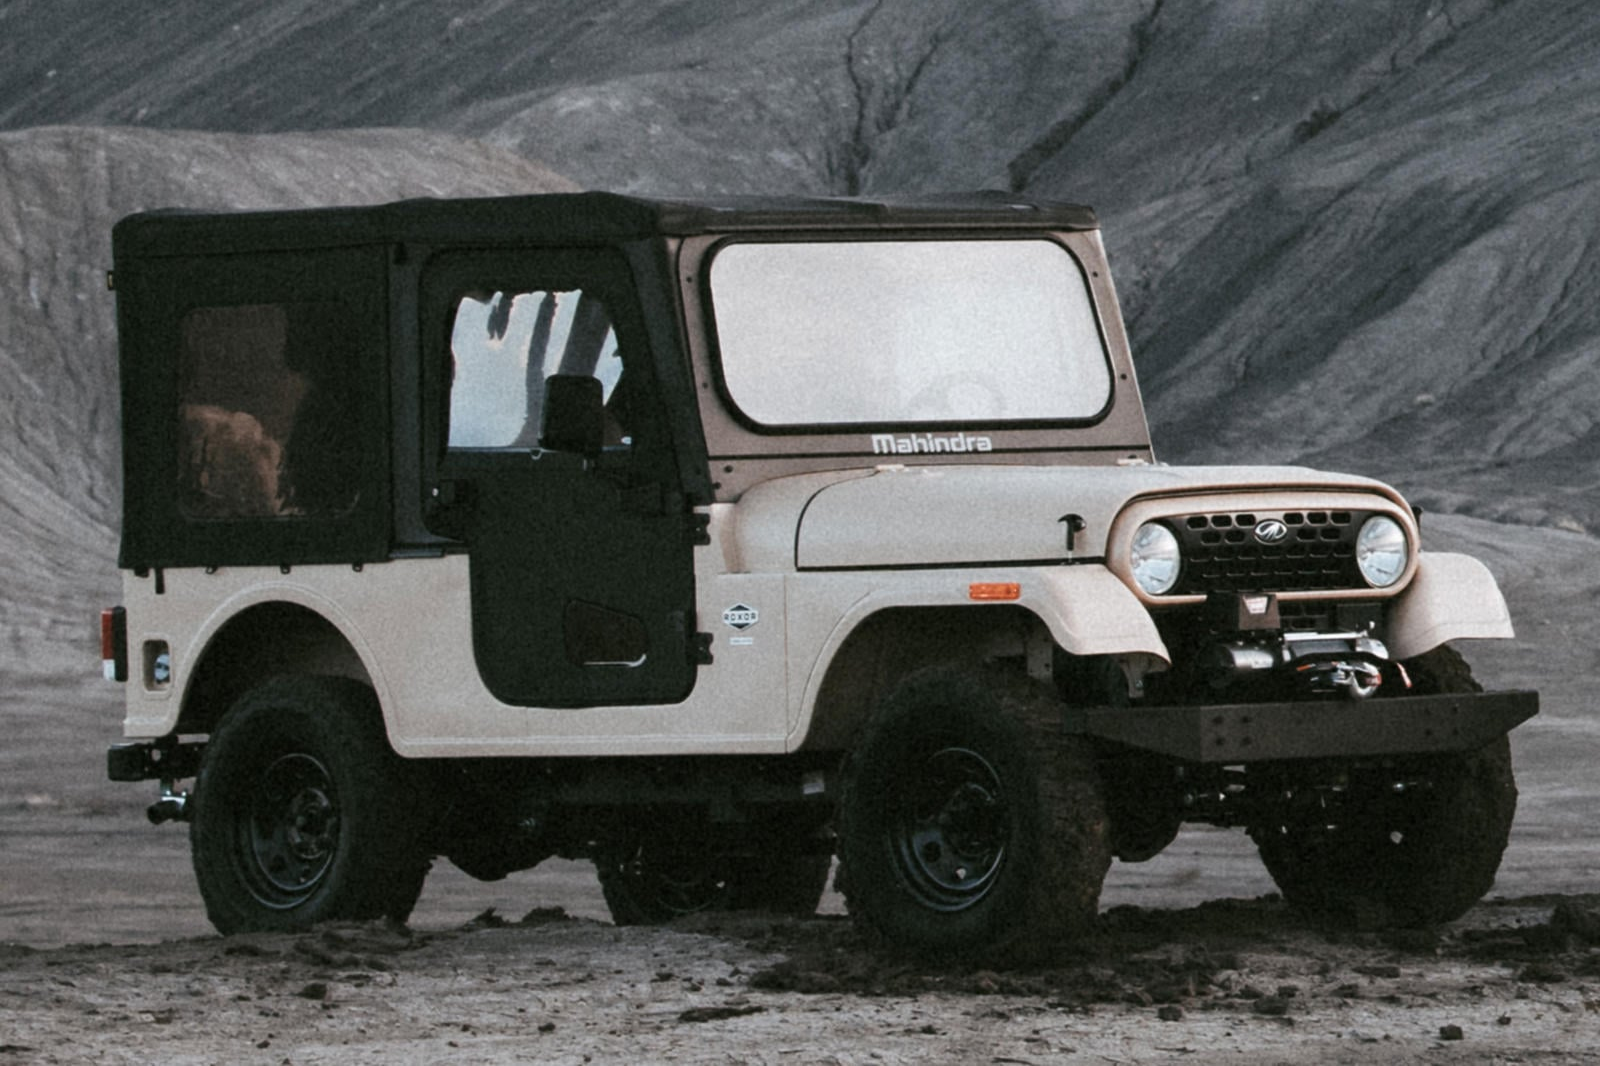 government, mahindra's jeep wrangler doppelganger cleared to sell in america